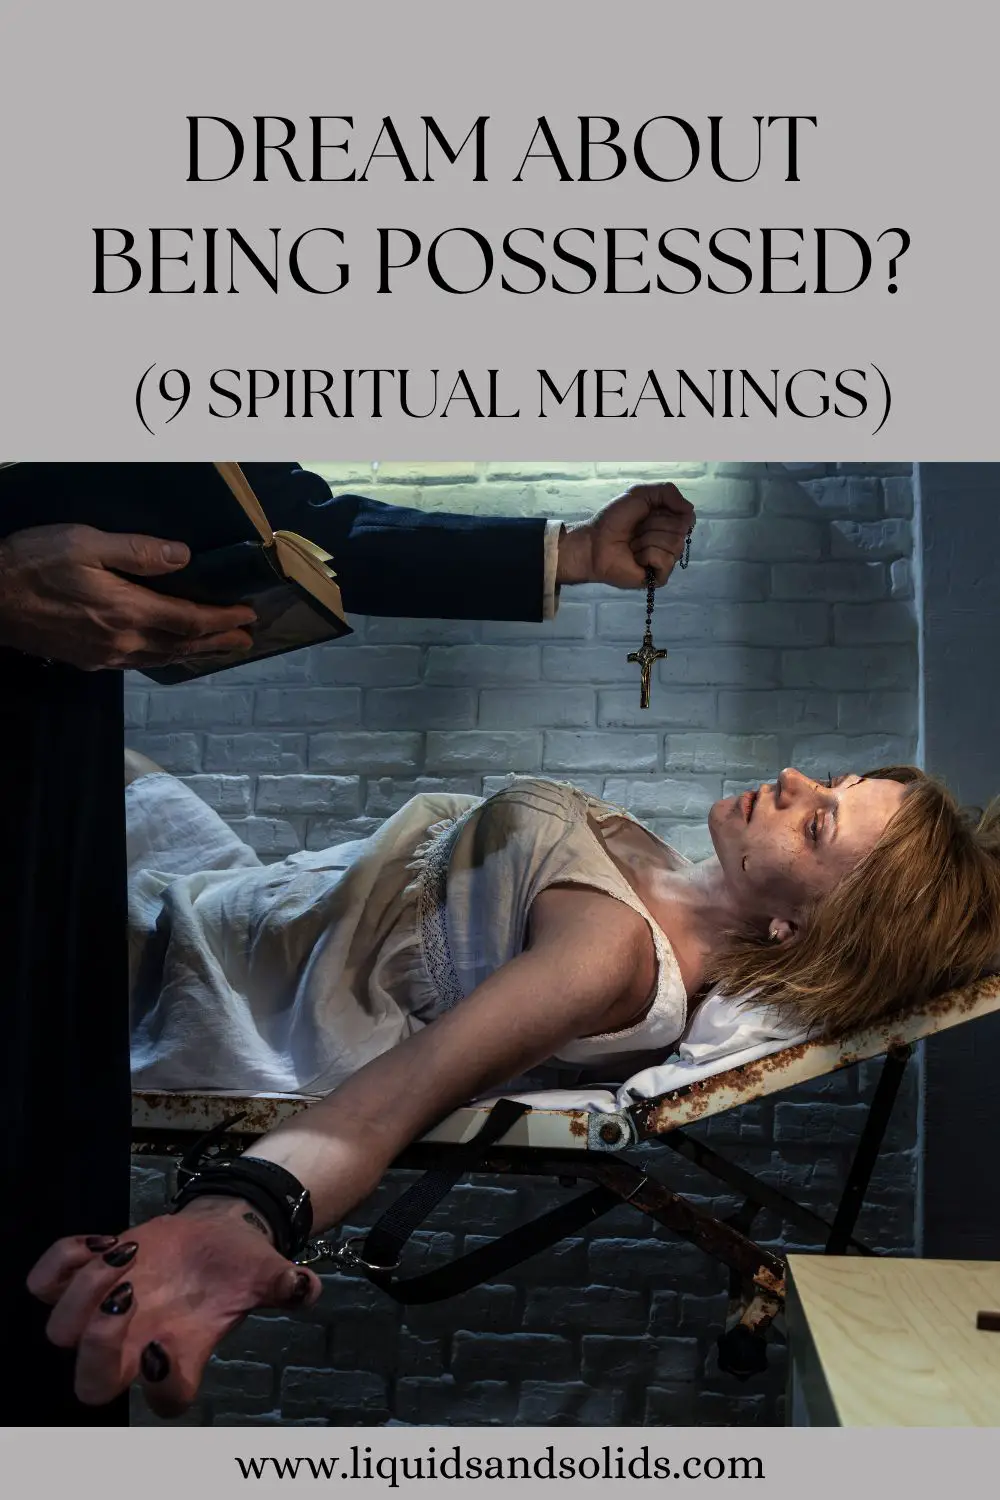 Dreams Of Being Possessed: Definition